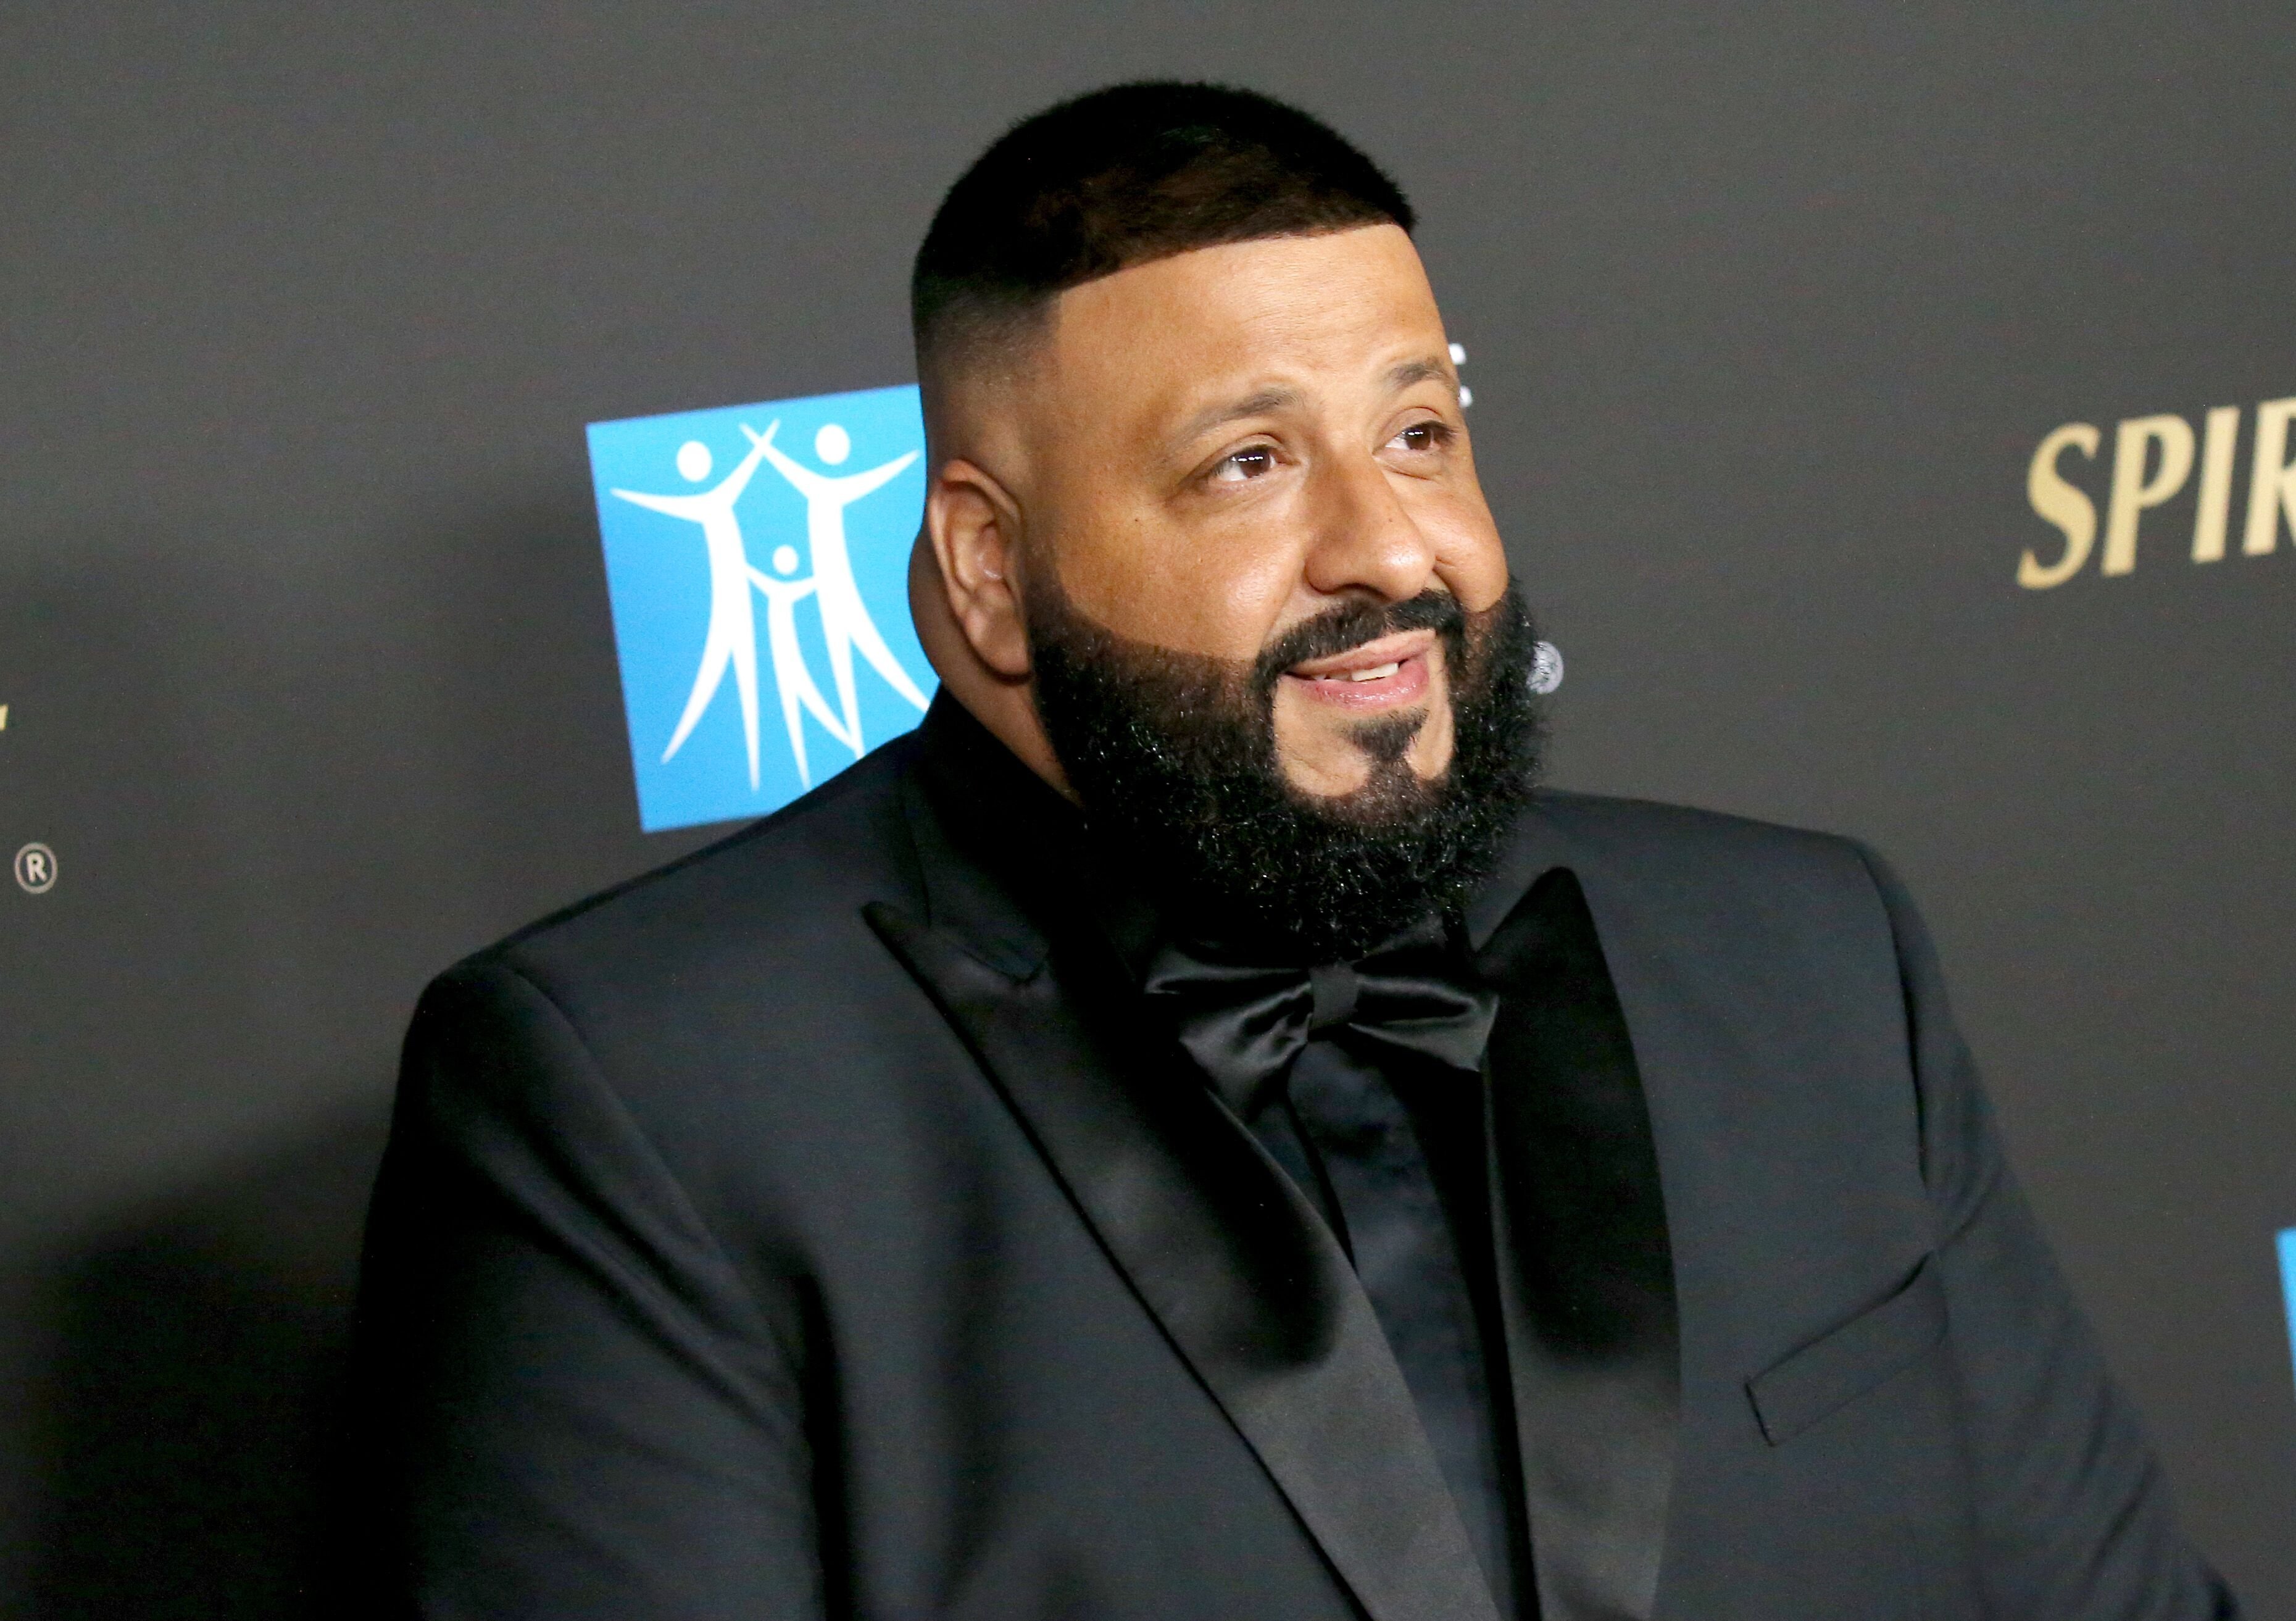 DJ Khaled attends the City Of Hope's Spirit of Life 2019 Gala held at The Barker Hanger on October 10, 2019. | Source: Getty Images